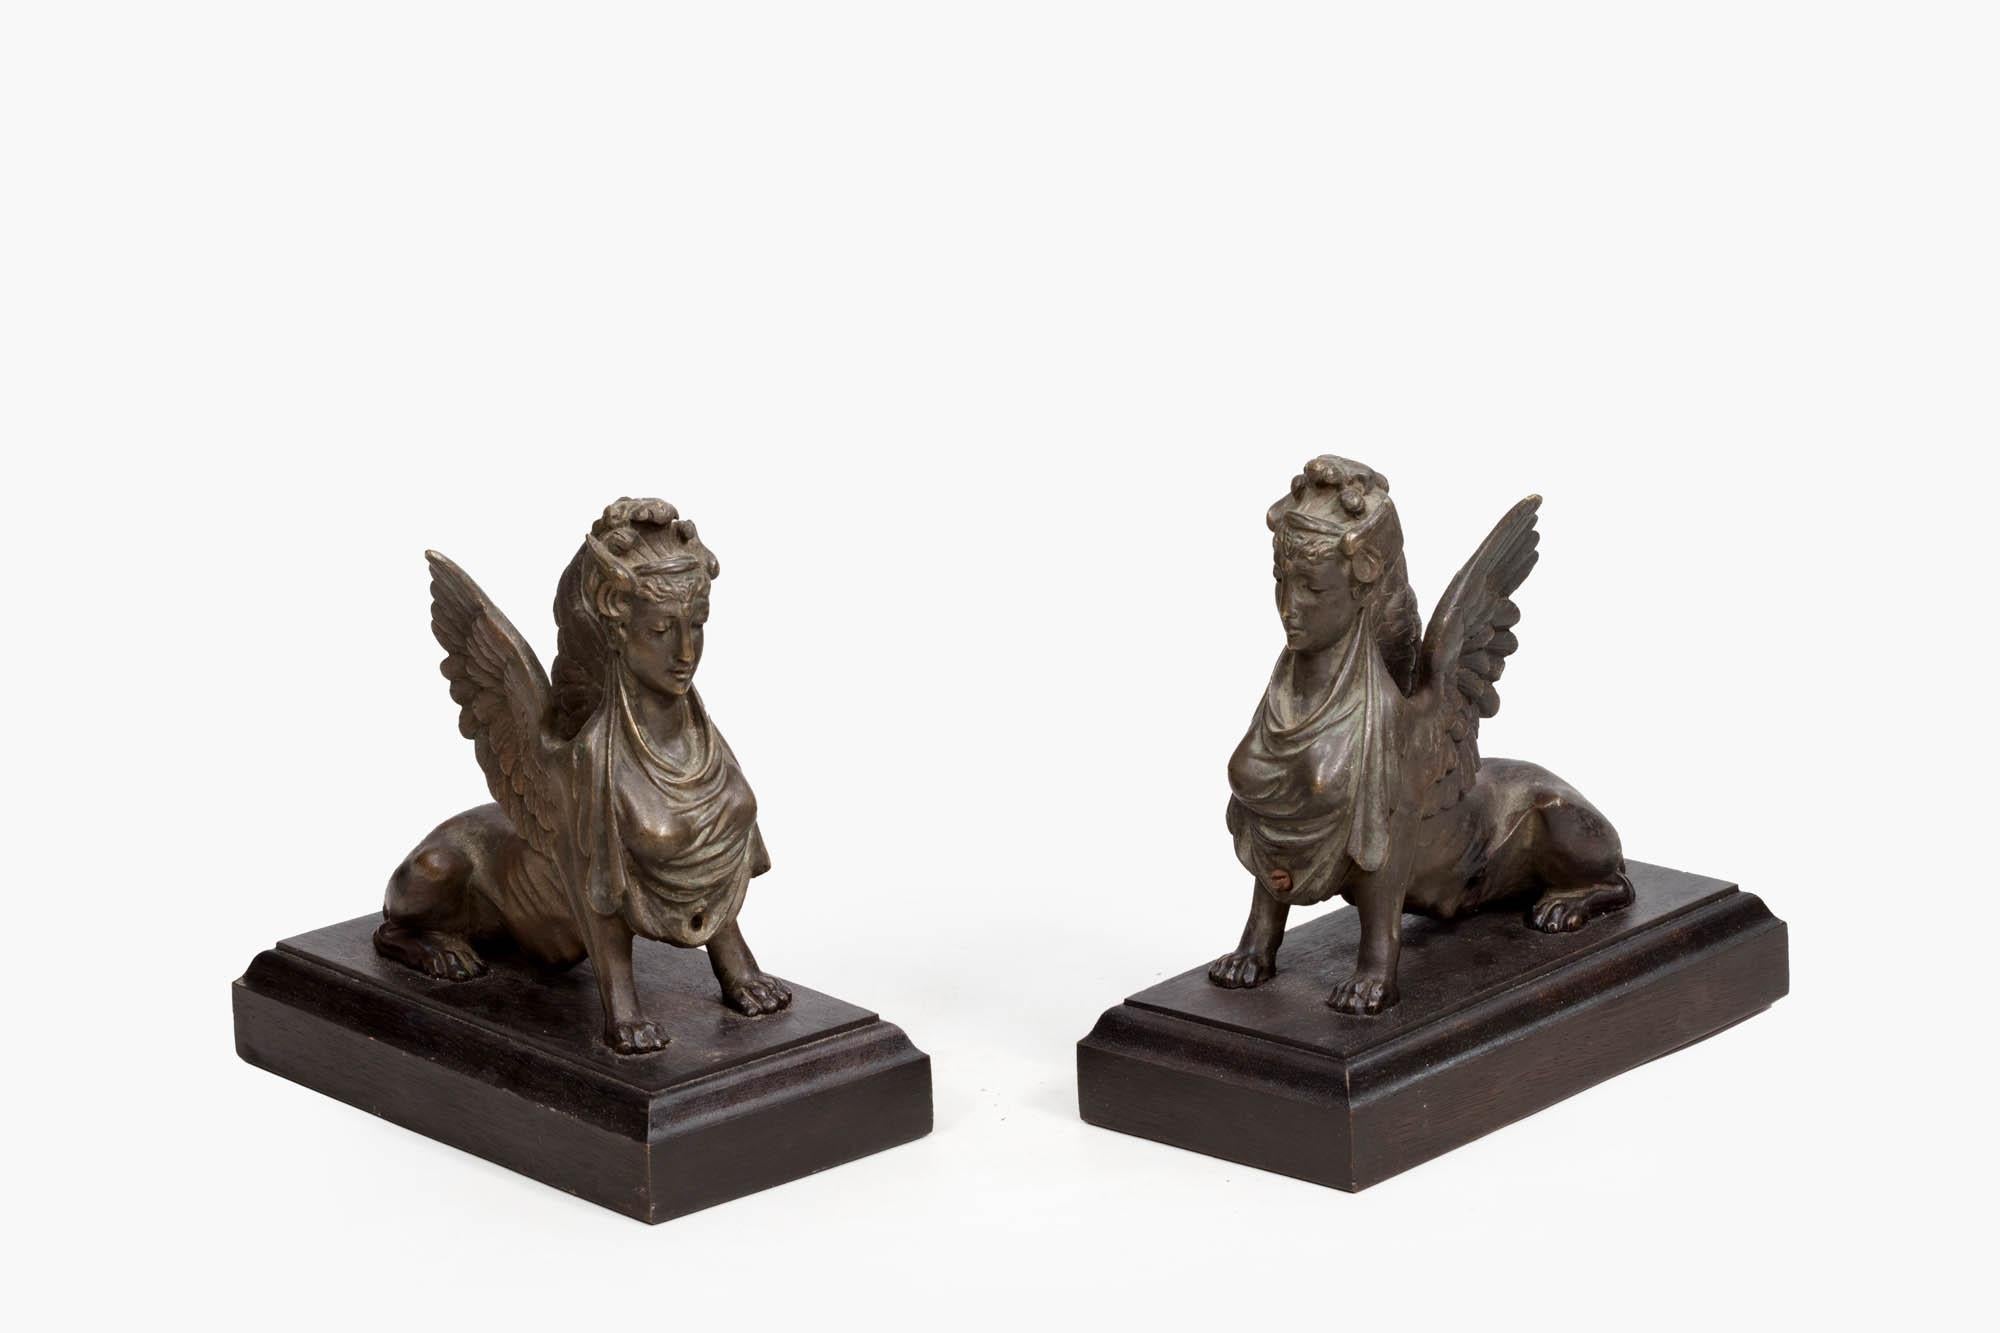 19th century pair of bronze Egyptian Revival sphinx figures in reclining poses seated on solid wooden rectangular plinth bases. A well-detailed pair with extended eagle wings drawn back over lion bodies, elegant headdresses and draped robes.